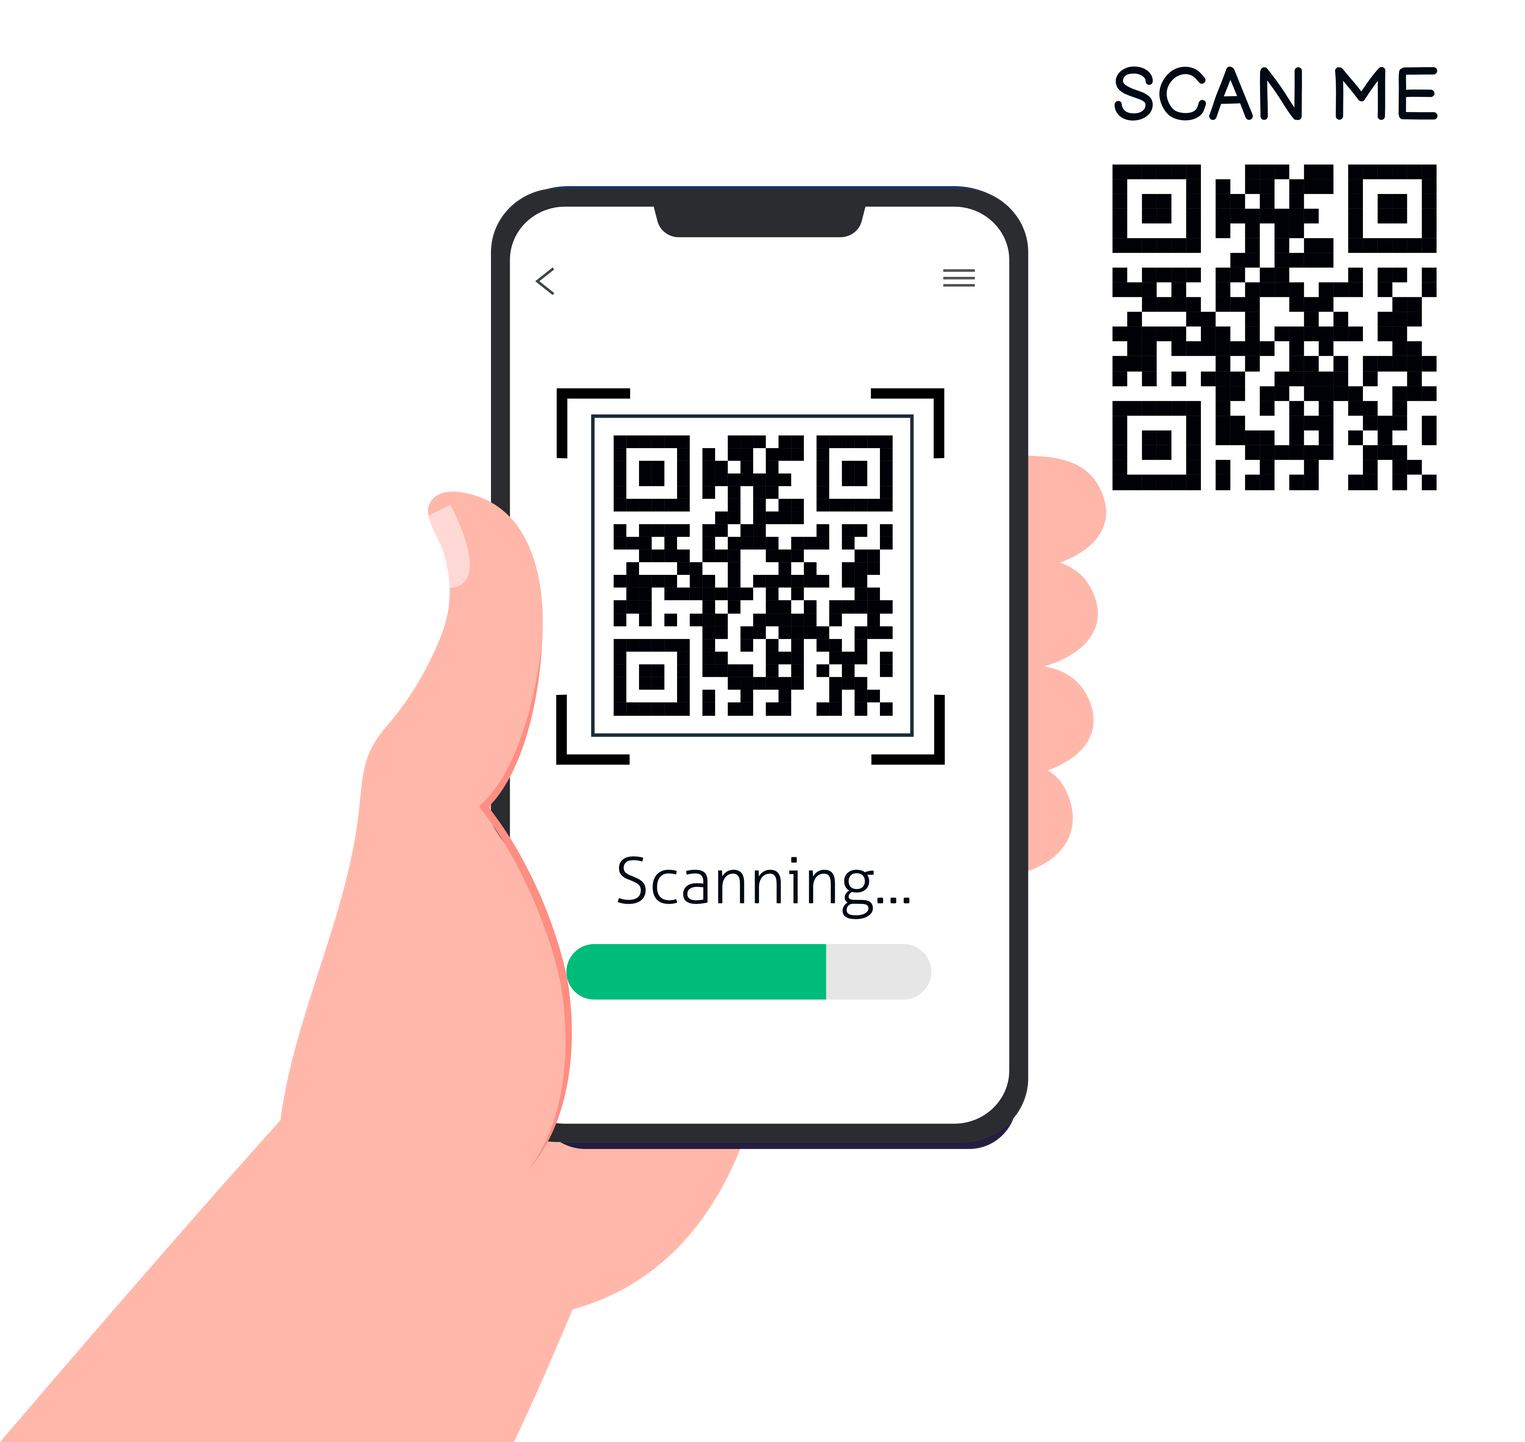 QR code scan with smartphone payment and Verification